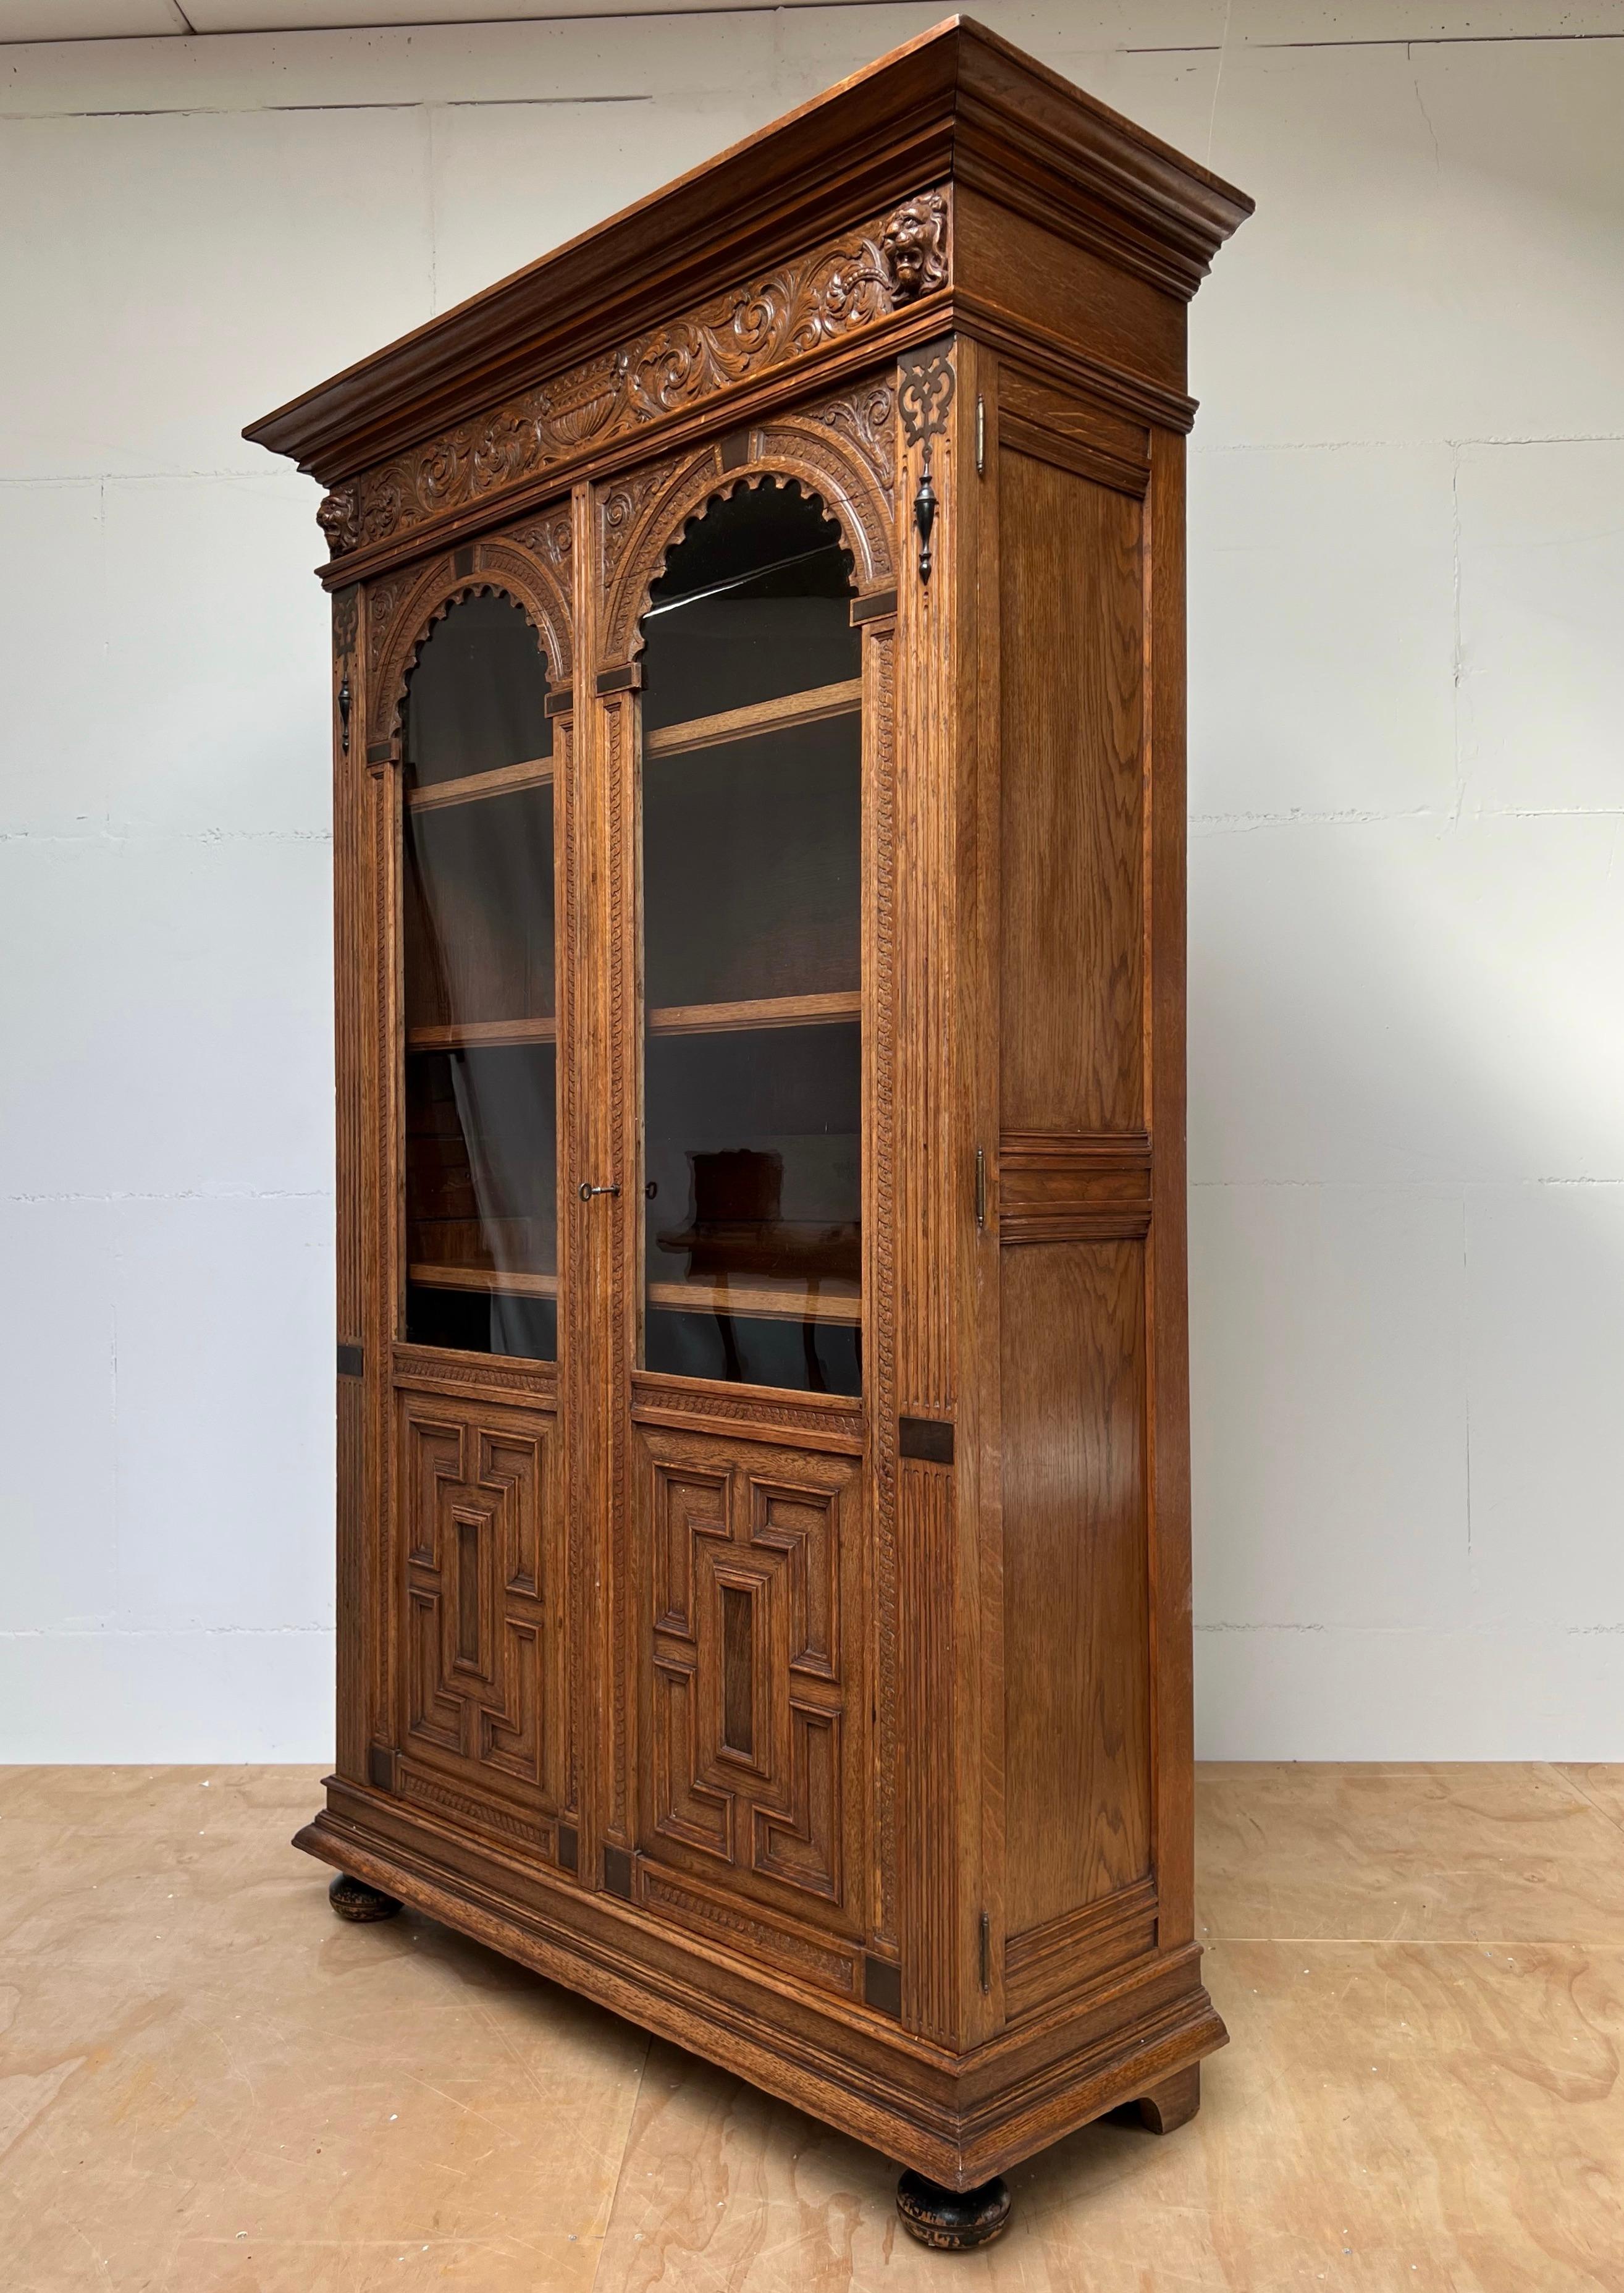 Solid oak Renaissance Revival bookcase with superbly hand carved decorations.

If you are familiar with style elements of the Renaissance era then you will immedidately recognize this practical size bookcase as a Renaissance Revival antique. In